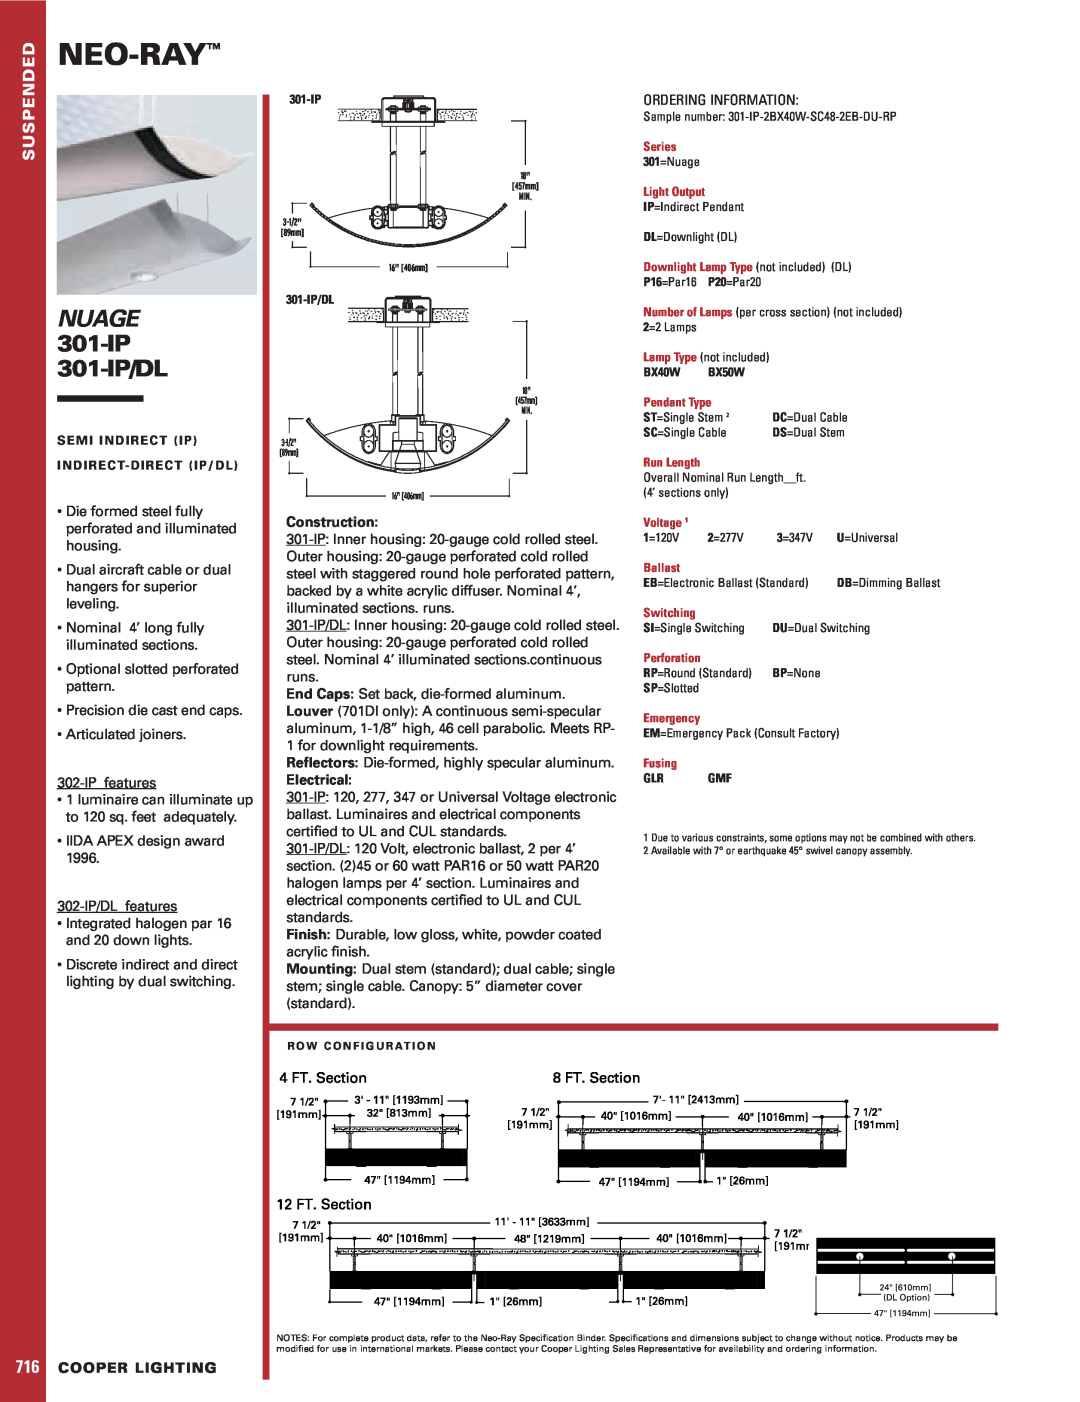 Cooper Lighting specifications Neo-Ray, Nuage, 301-IP 301-IP/DL, Construction, Electrical, Cooper Lighting 